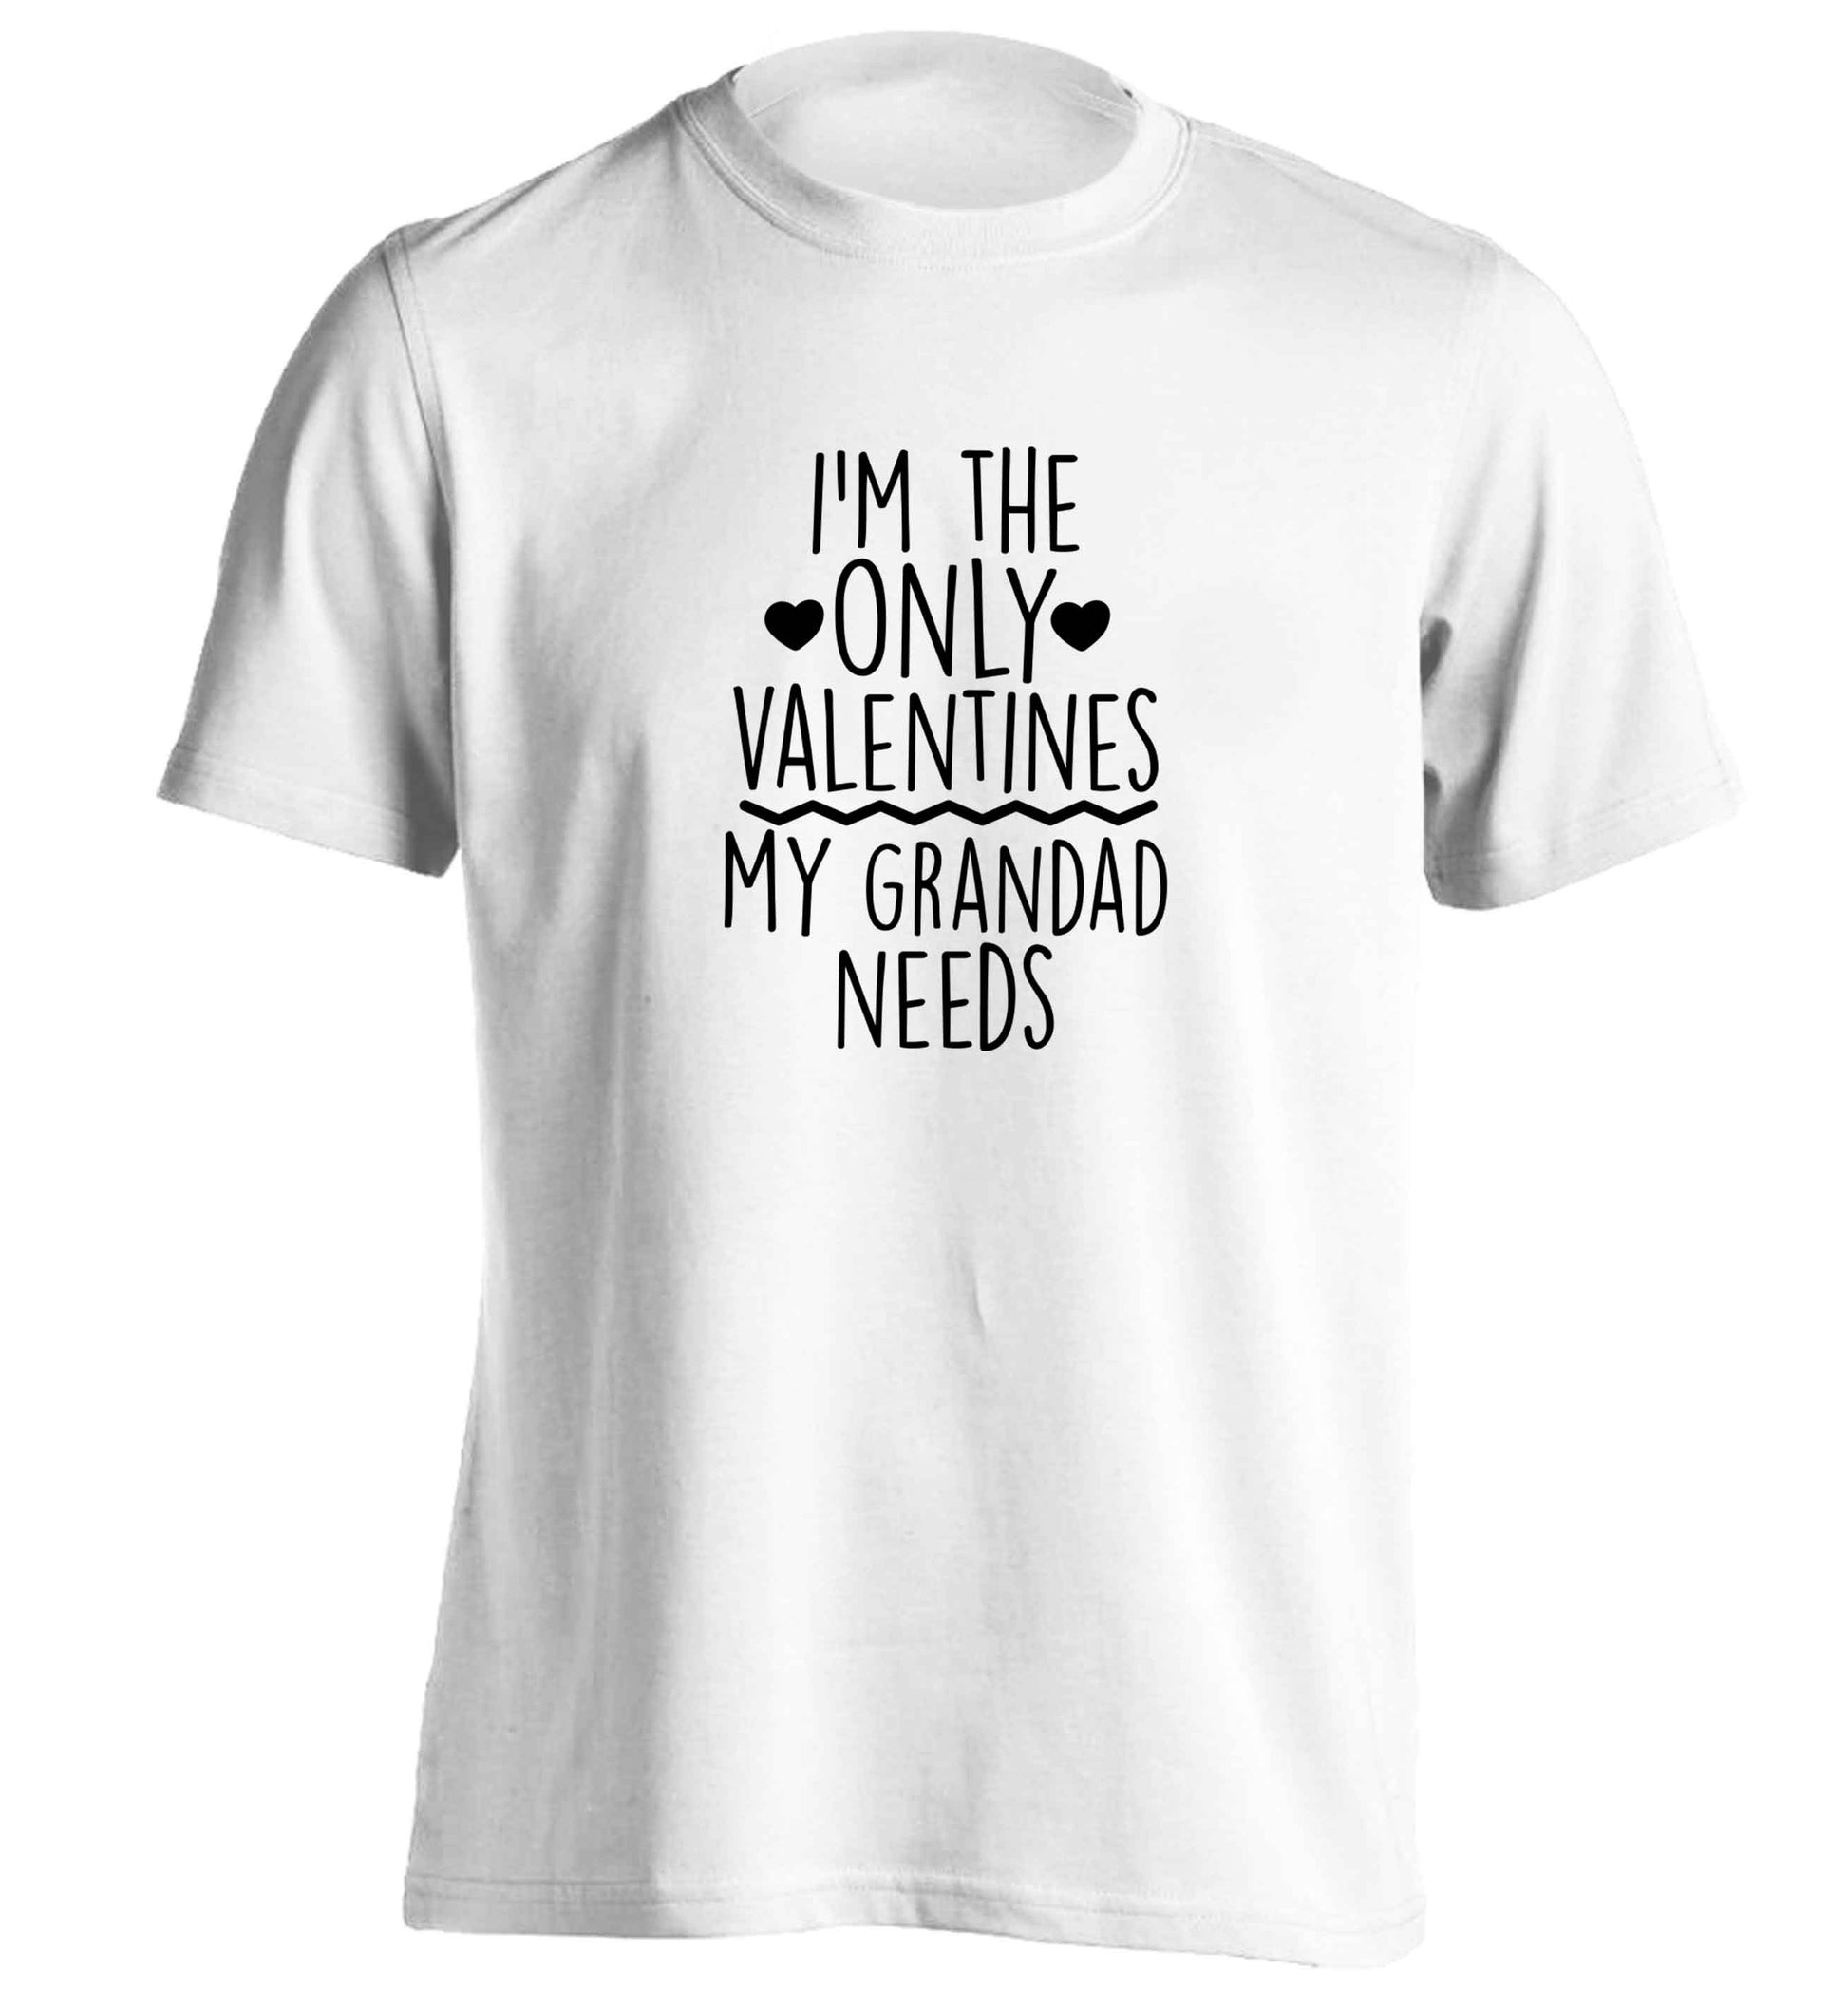 I'm the only valentines my grandad needs adults unisex white Tshirt 2XL